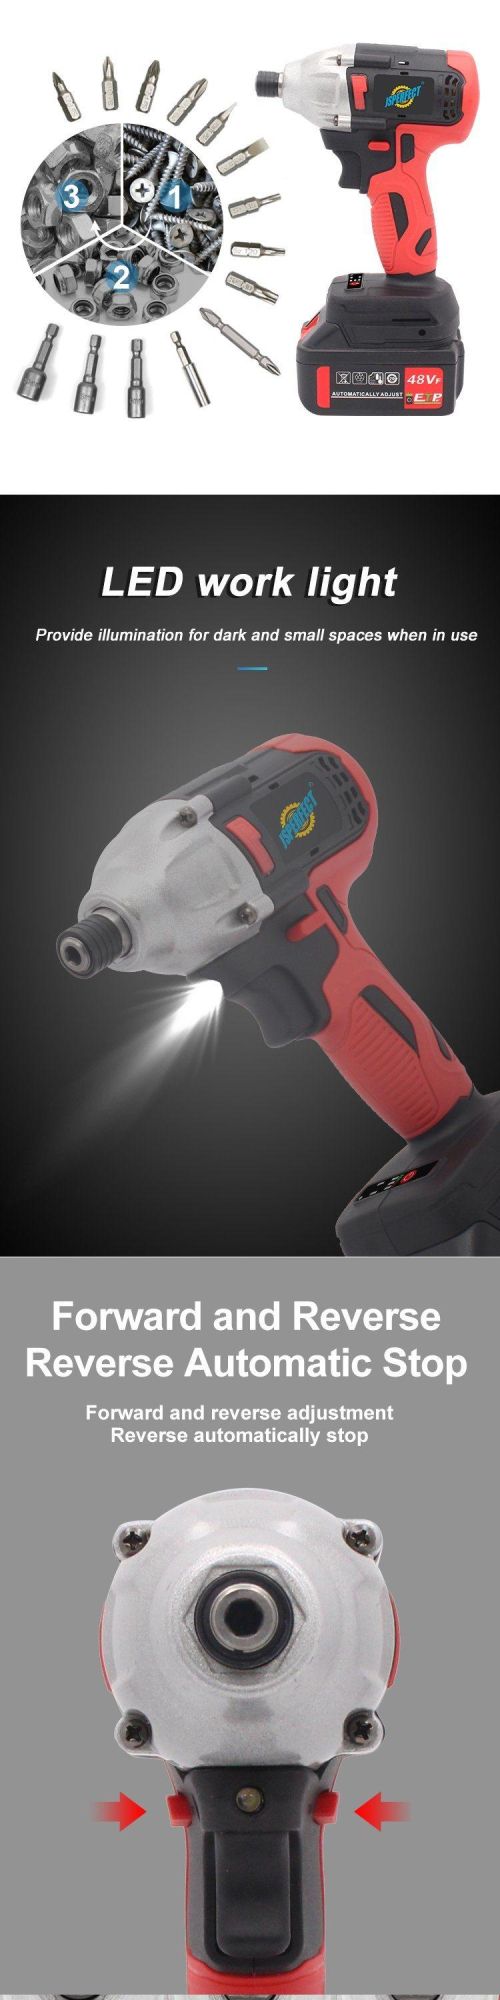 Electric Screwdriver Drill with Li-ion Baterry